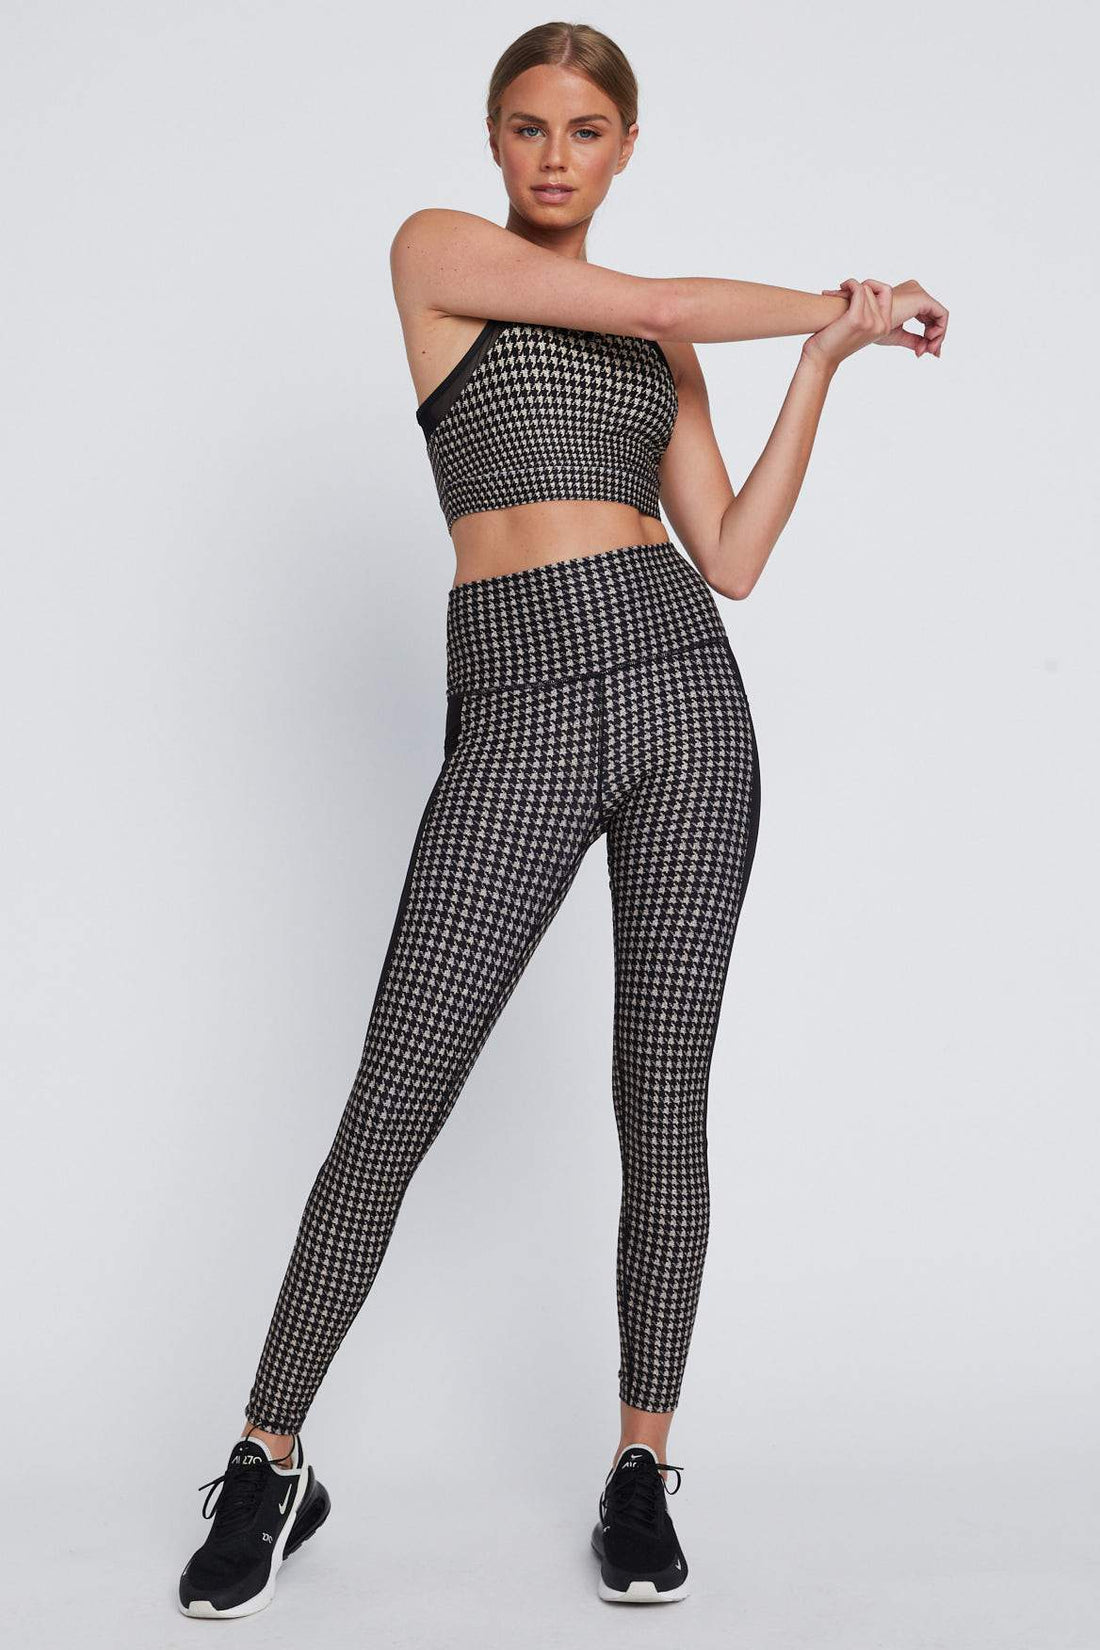 NEW Anthropologie $209 The Upside Houndstooth Leggings and Top